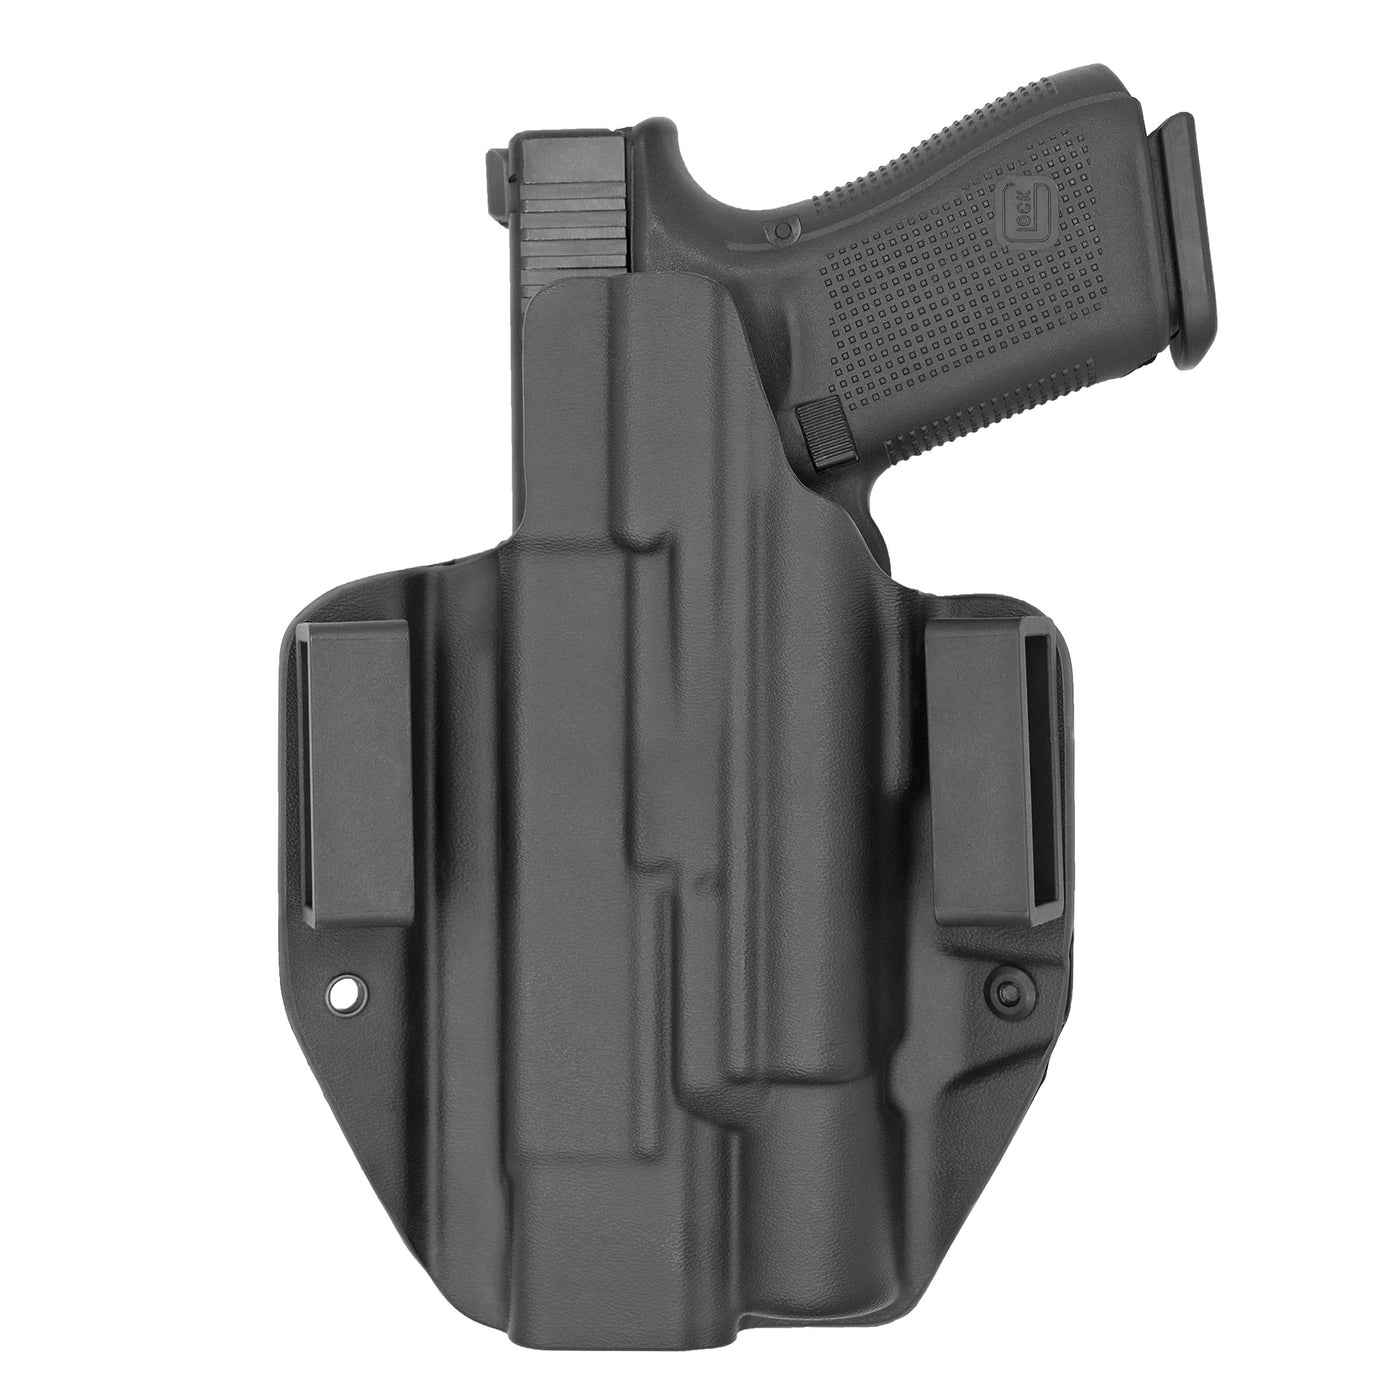 C&G Holsters Quickship OWB Tactical Shadow Systems Surefire X300 holstered back view